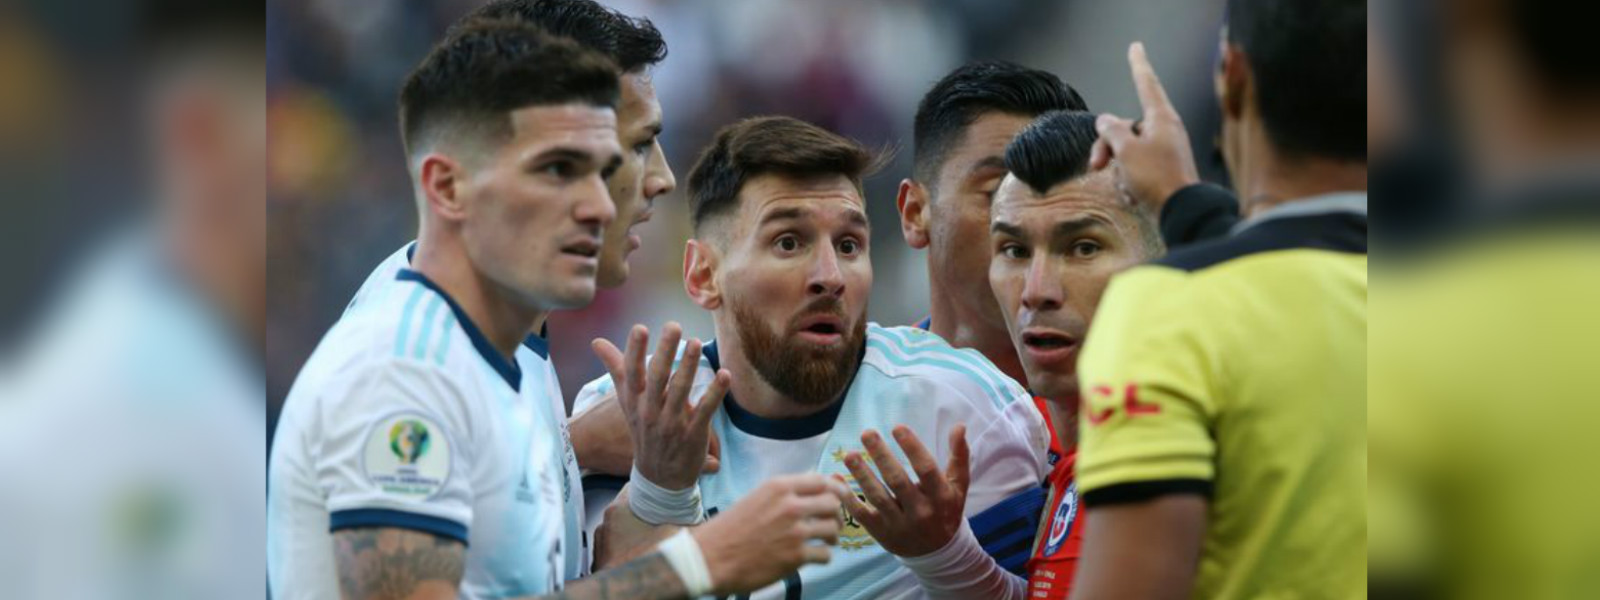 Brazil ready for Argentina friendly match as Messi returns from ban